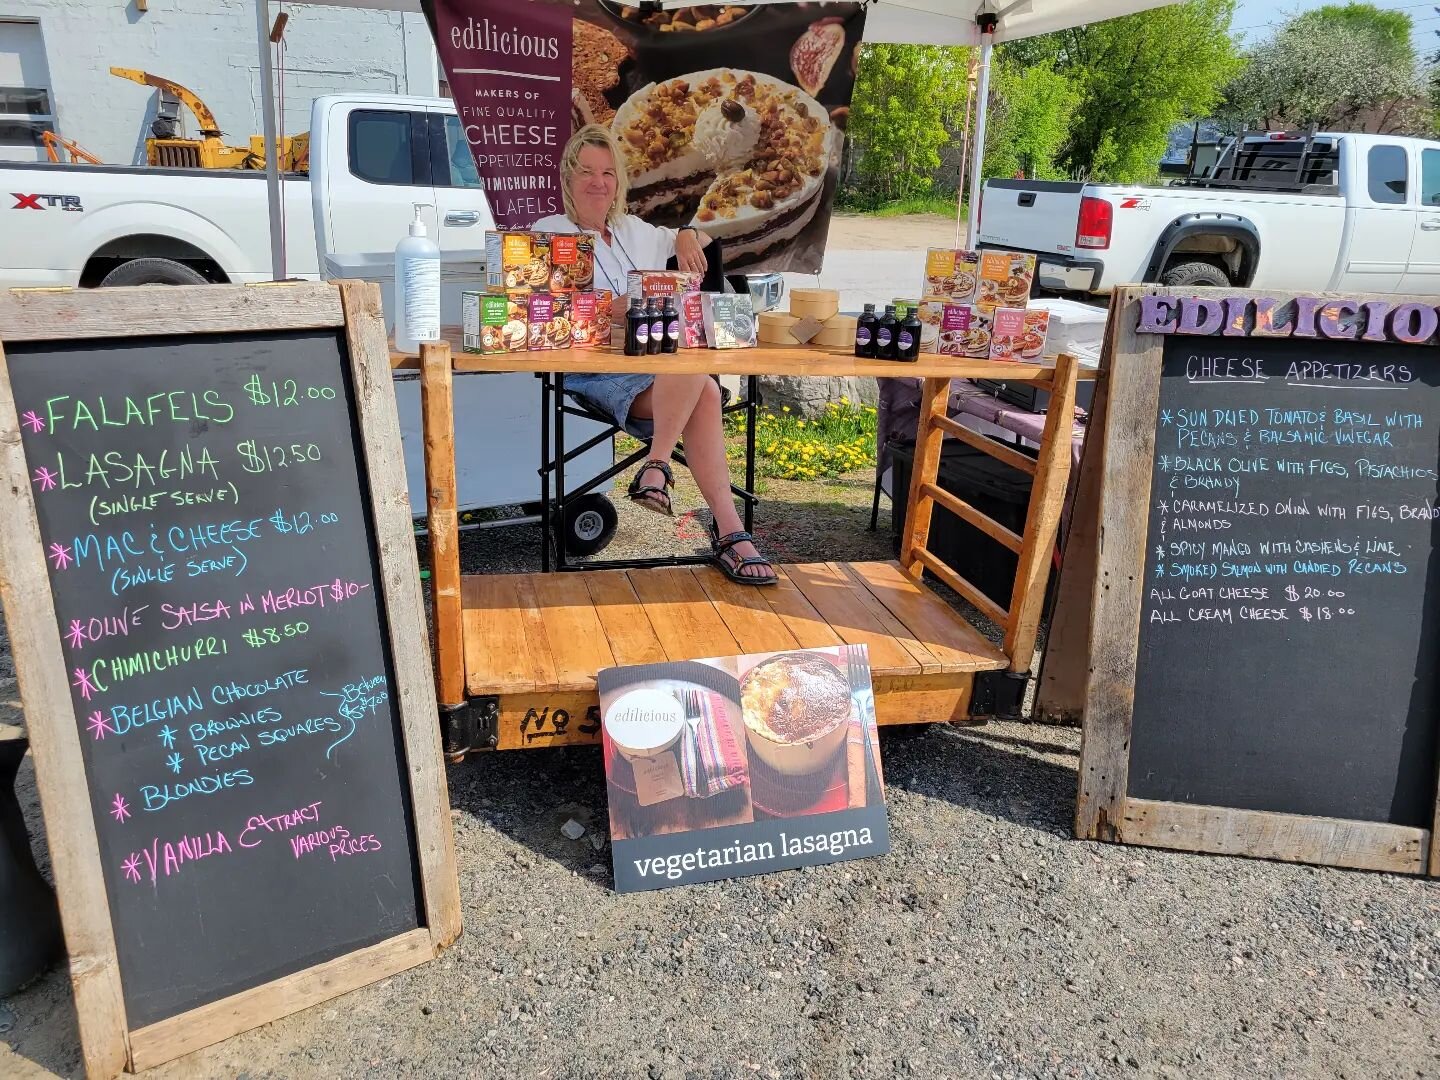 Edilicious is back in Minden with a great selection of cheese appetizers, homemade vanilla extract, vegetarian lasagna and so much more! YUM! @edilicious_foods 
.
.
.
.
#superlocal #eatlocal #supportsmallbusiness #cheeseplease #myfarmersmarket #myhal